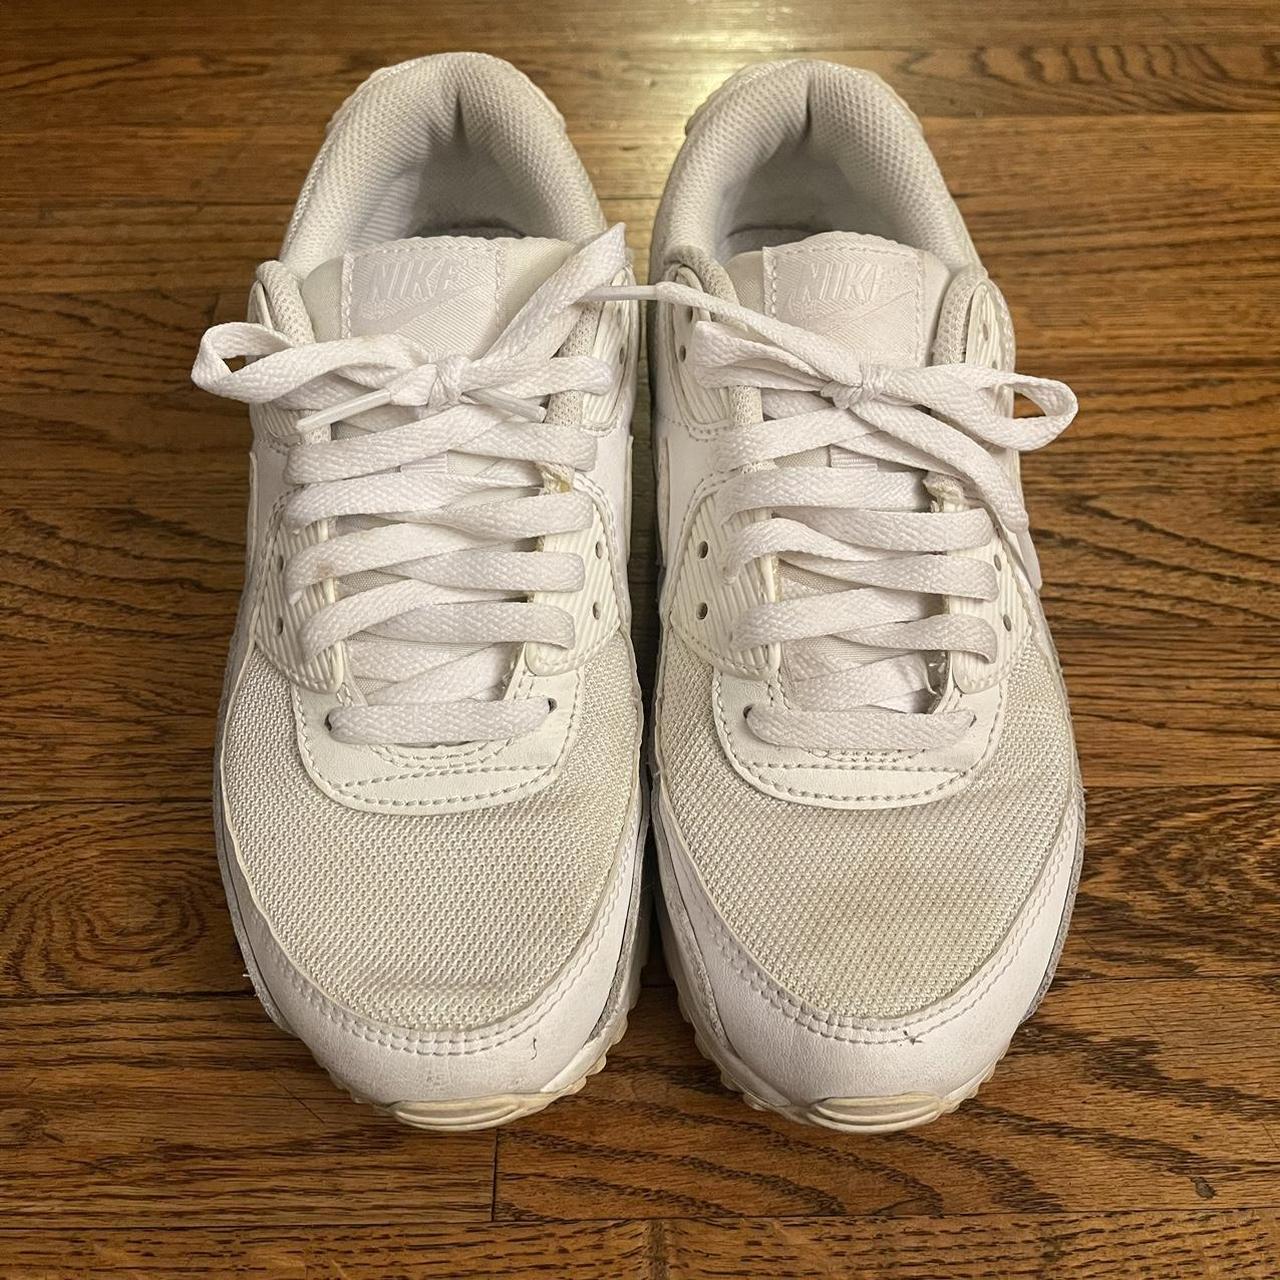 White Nike Air Max 90s Great condition, no signs of... - Depop